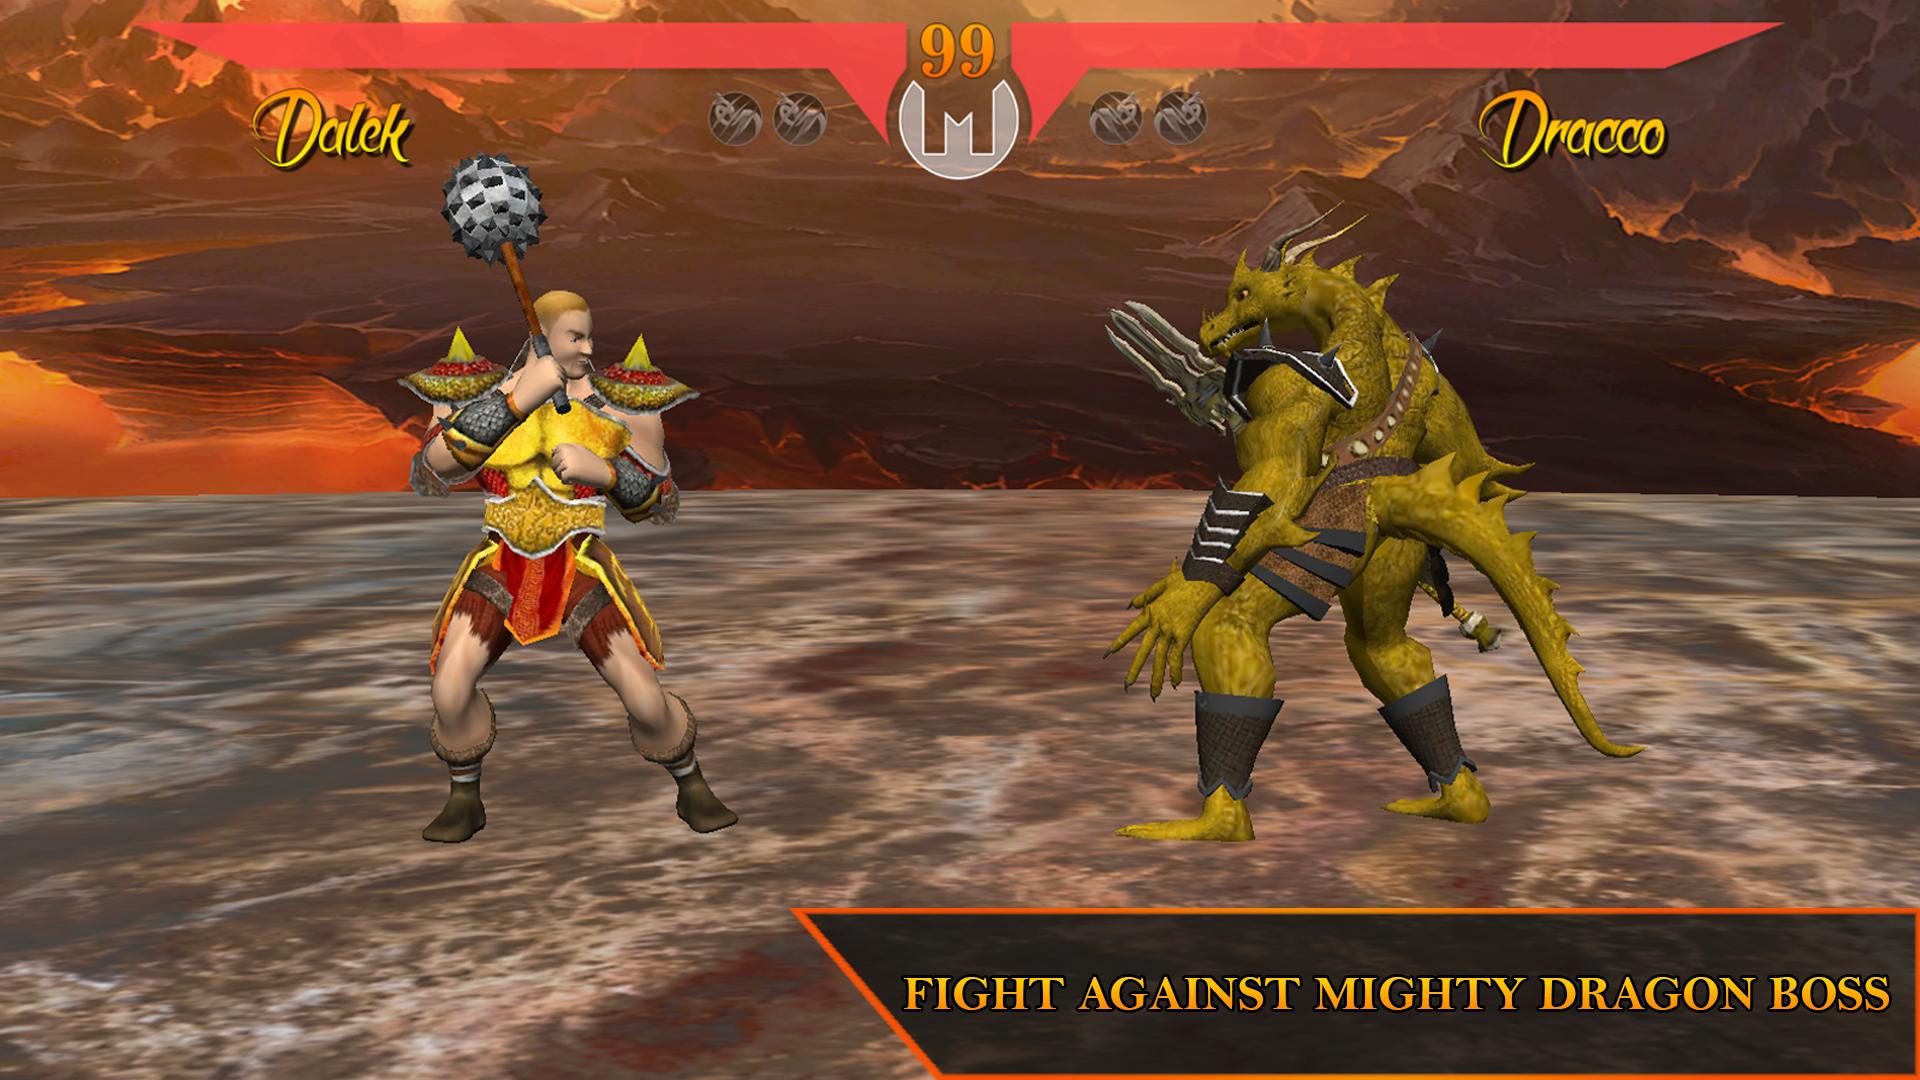 Freedom fighter 2 game free download full version for windows 8.1